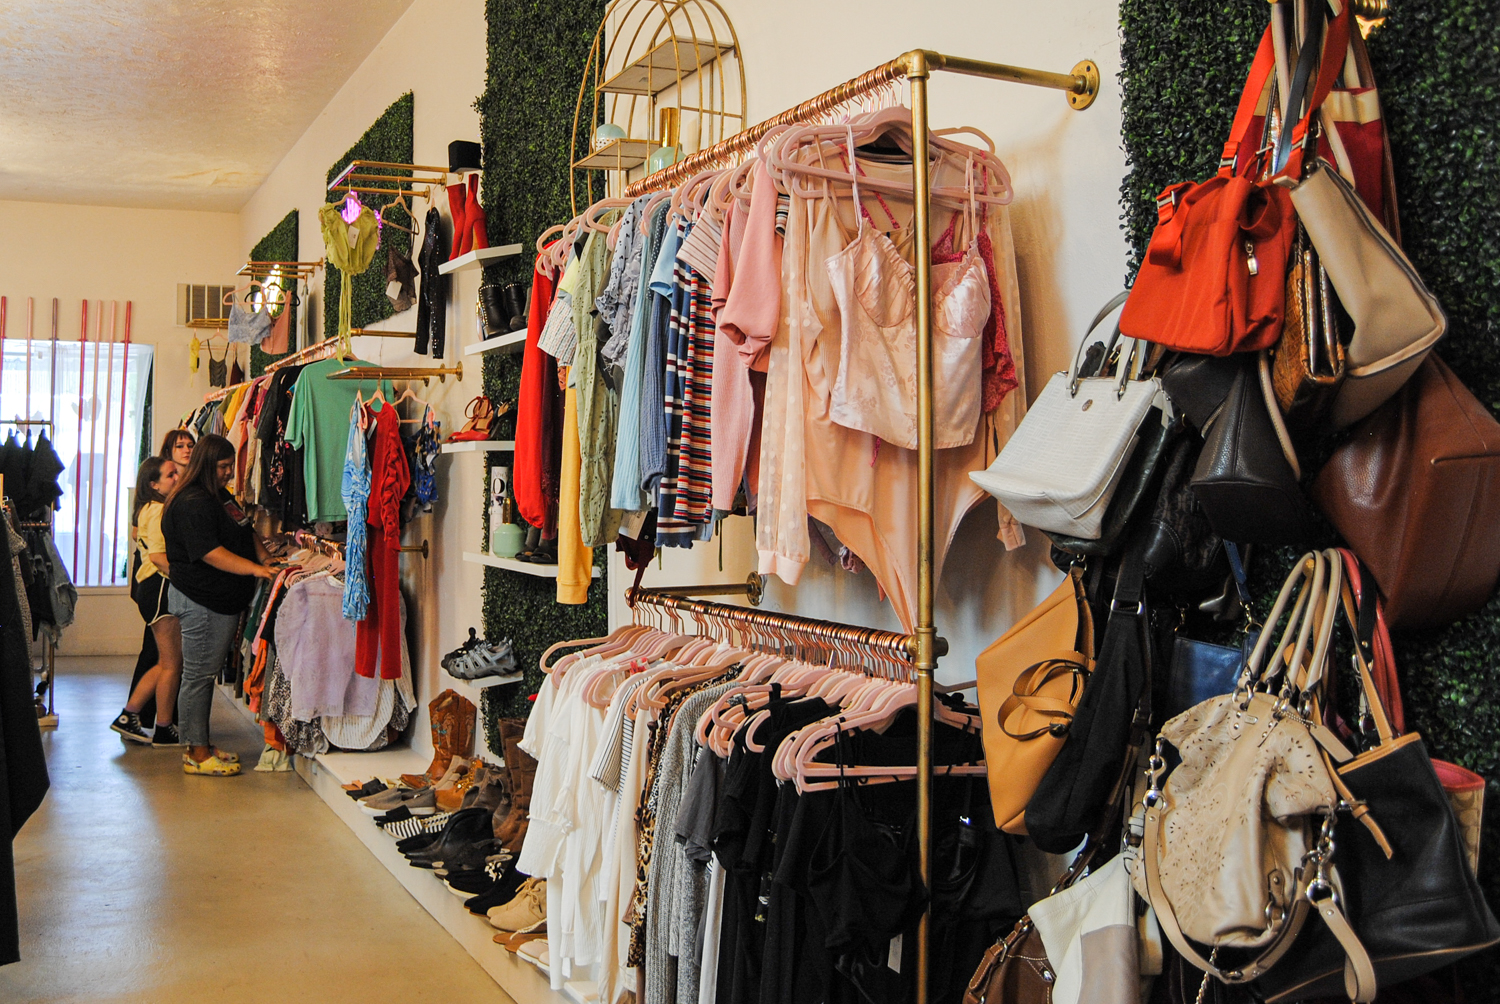 The Boutique On Main Street, Luxury Consignment Shop